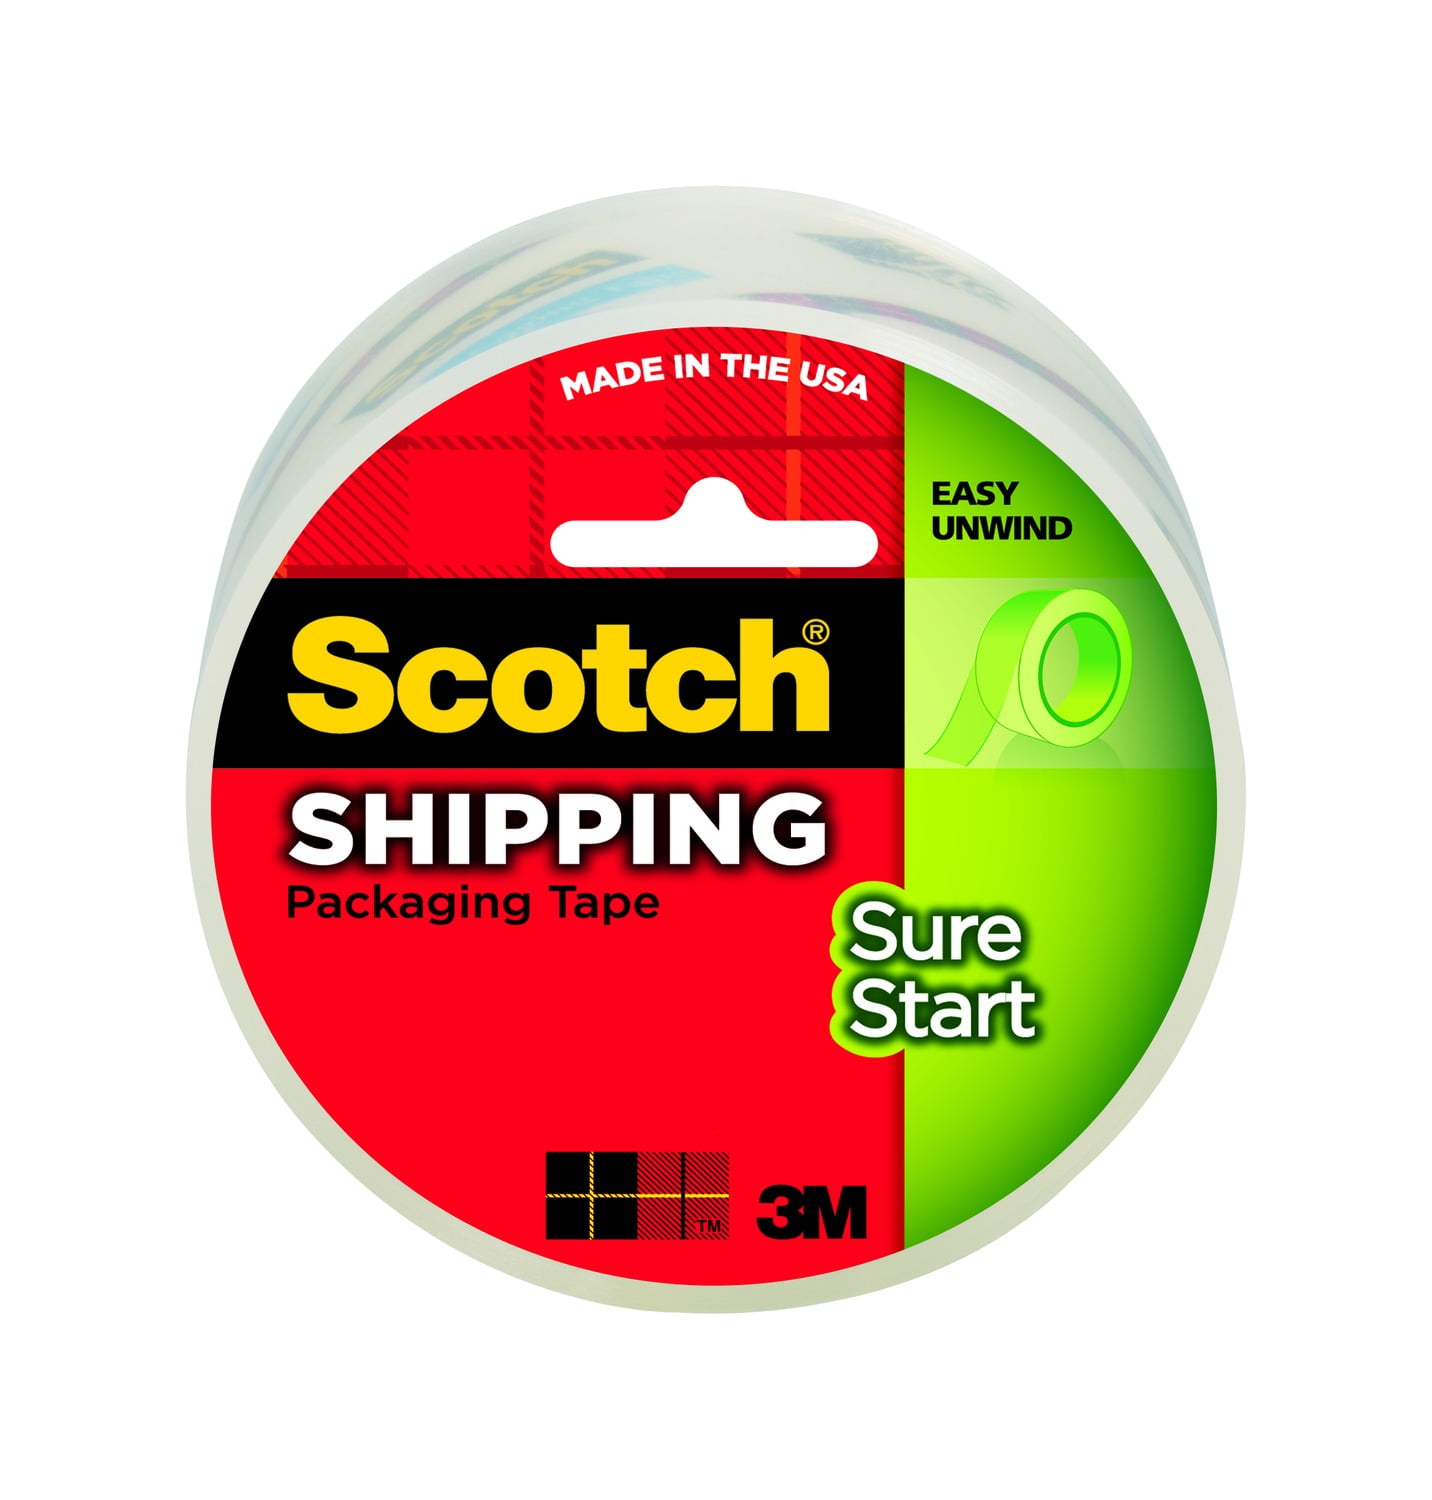 FREE SHIPPING FEDEX 2-DAY Scotch Heavy Duty Shipping Tape 3M 8-PACK 